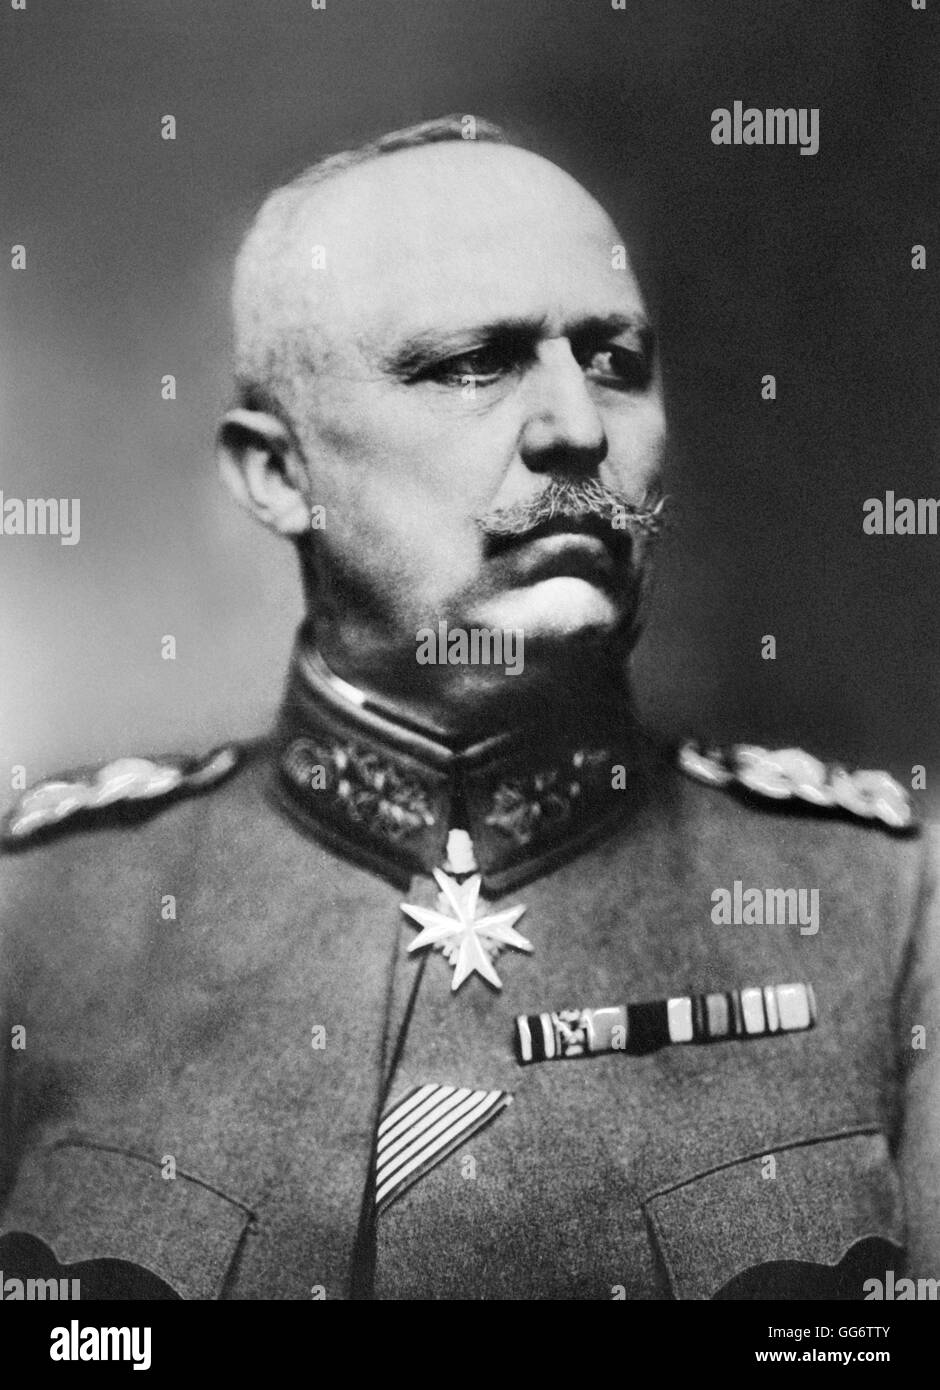 Erich Ludendorff. Portrait of General Erich Ludendorff (1865-1937), deputy to the Chief of General Staff of the German army from August 1916 onwards. Photo from Bain News Service, date unknown. Stock Photo